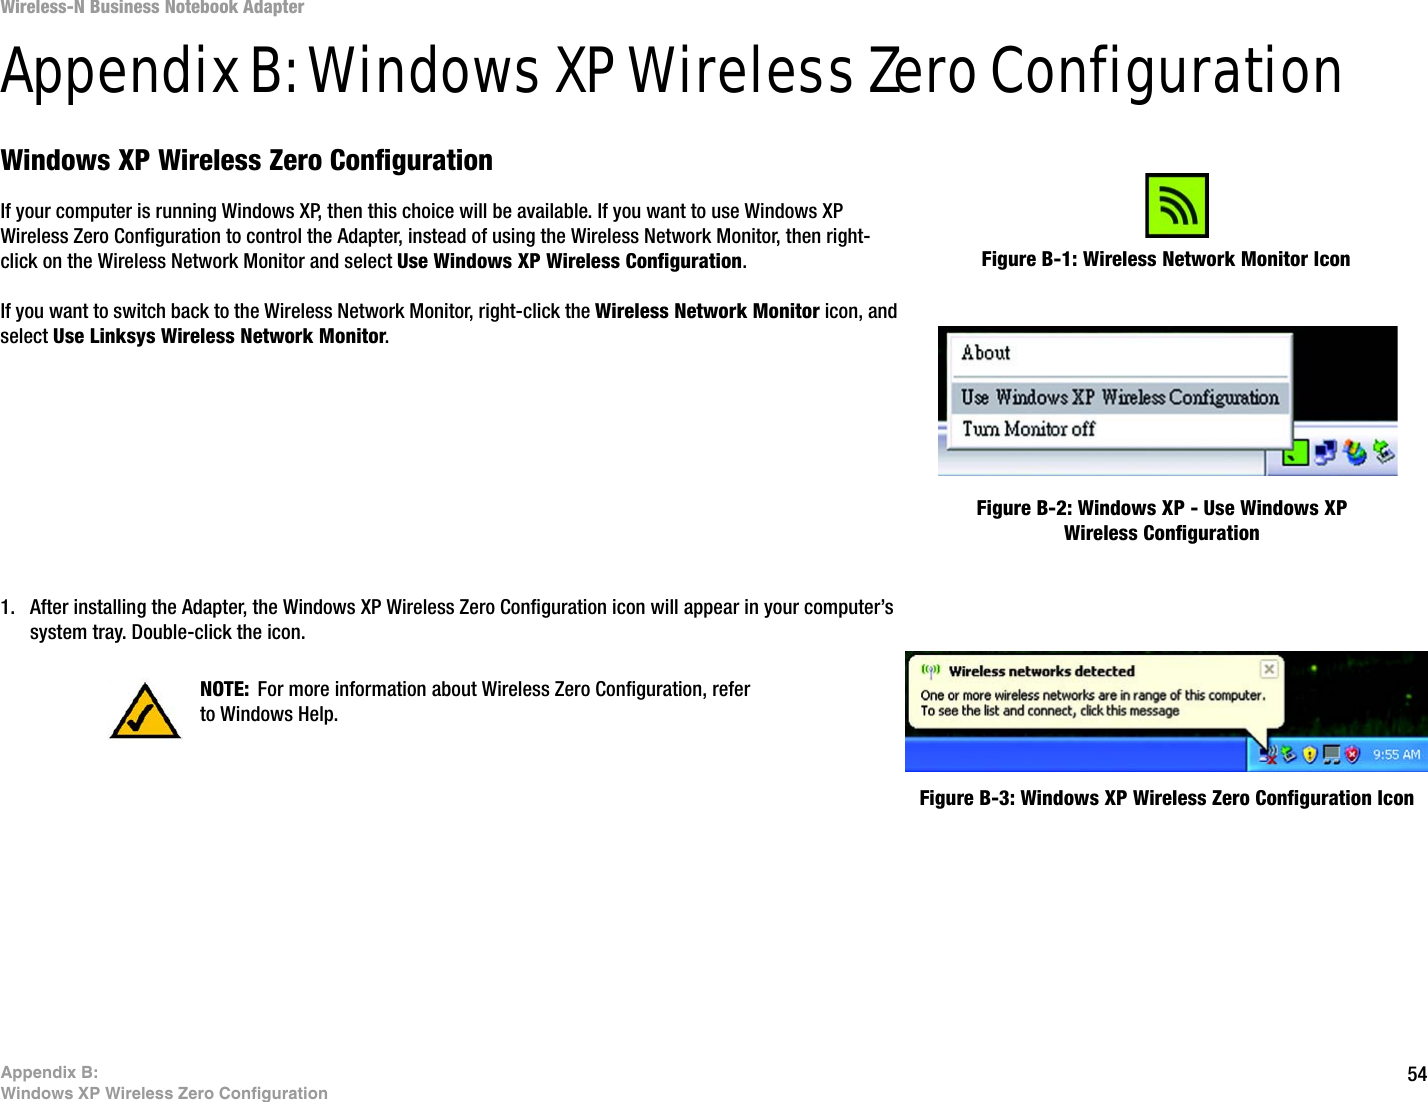 54Appendix B: Windows XP Wireless Zero ConfigurationWireless-N Business Notebook Adapter Appendix B: Windows XP Wireless Zero ConfigurationWindows XP Wireless Zero ConfigurationIf your computer is running Windows XP, then this choice will be available. If you want to use Windows XP Wireless Zero Configuration to control the Adapter, instead of using the Wireless Network Monitor, then right-click on the Wireless Network Monitor and select Use Windows XP Wireless Configuration. If you want to switch back to the Wireless Network Monitor, right-click the Wireless Network Monitor icon, and select Use Linksys Wireless Network Monitor.1. After installing the Adapter, the Windows XP Wireless Zero Configuration icon will appear in your computer’s system tray. Double-click the icon. Figure B-1: Wireless Network Monitor IconFigure B-2: Windows XP - Use Windows XP Wireless ConfigurationNOTE: For more information about Wireless Zero Configuration, refer to Windows Help.Figure B-3: Windows XP Wireless Zero Configuration Icon